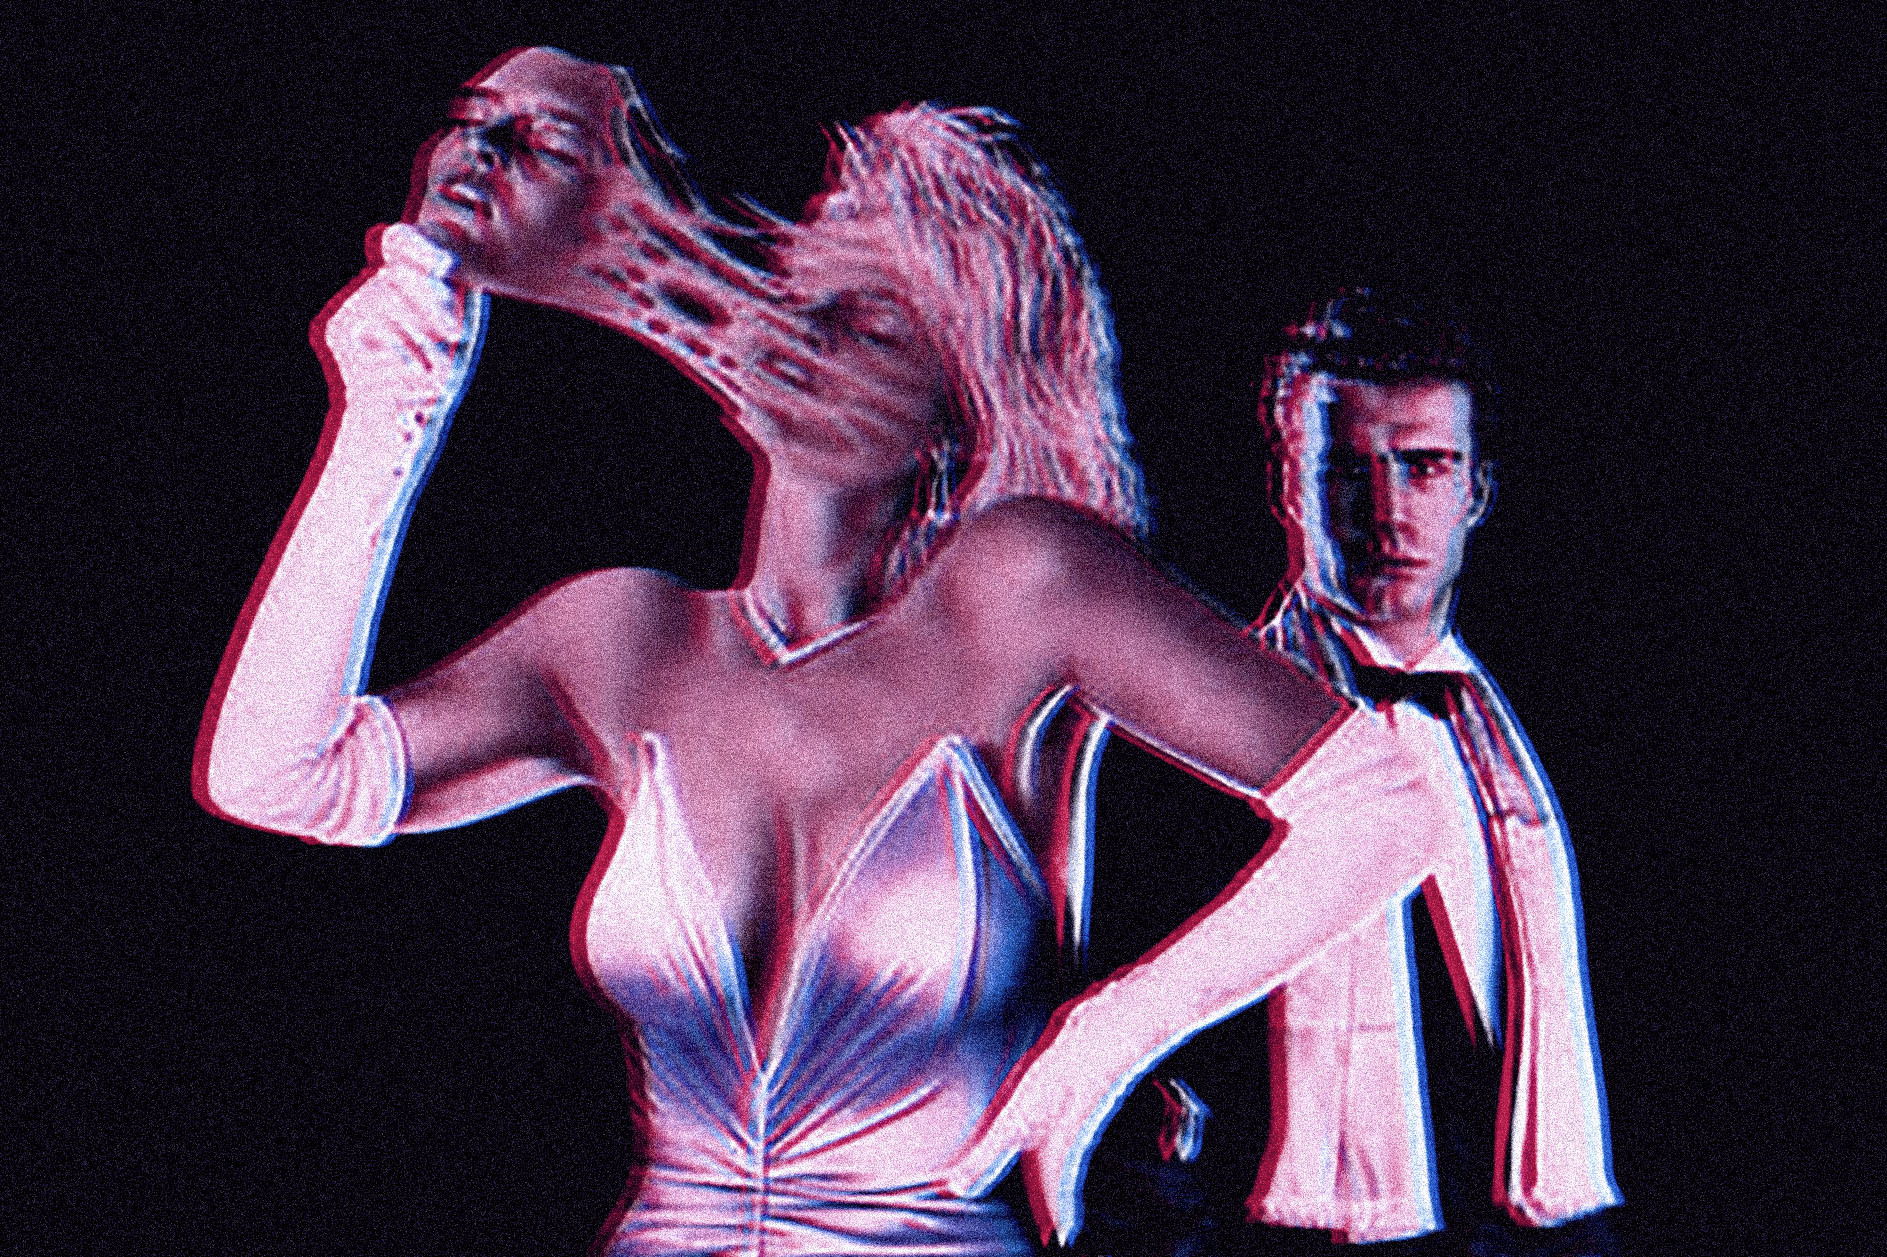 Brian Yuzna’s "Society" delves past the placid surfaces of late ‘80s Beverly Hills.